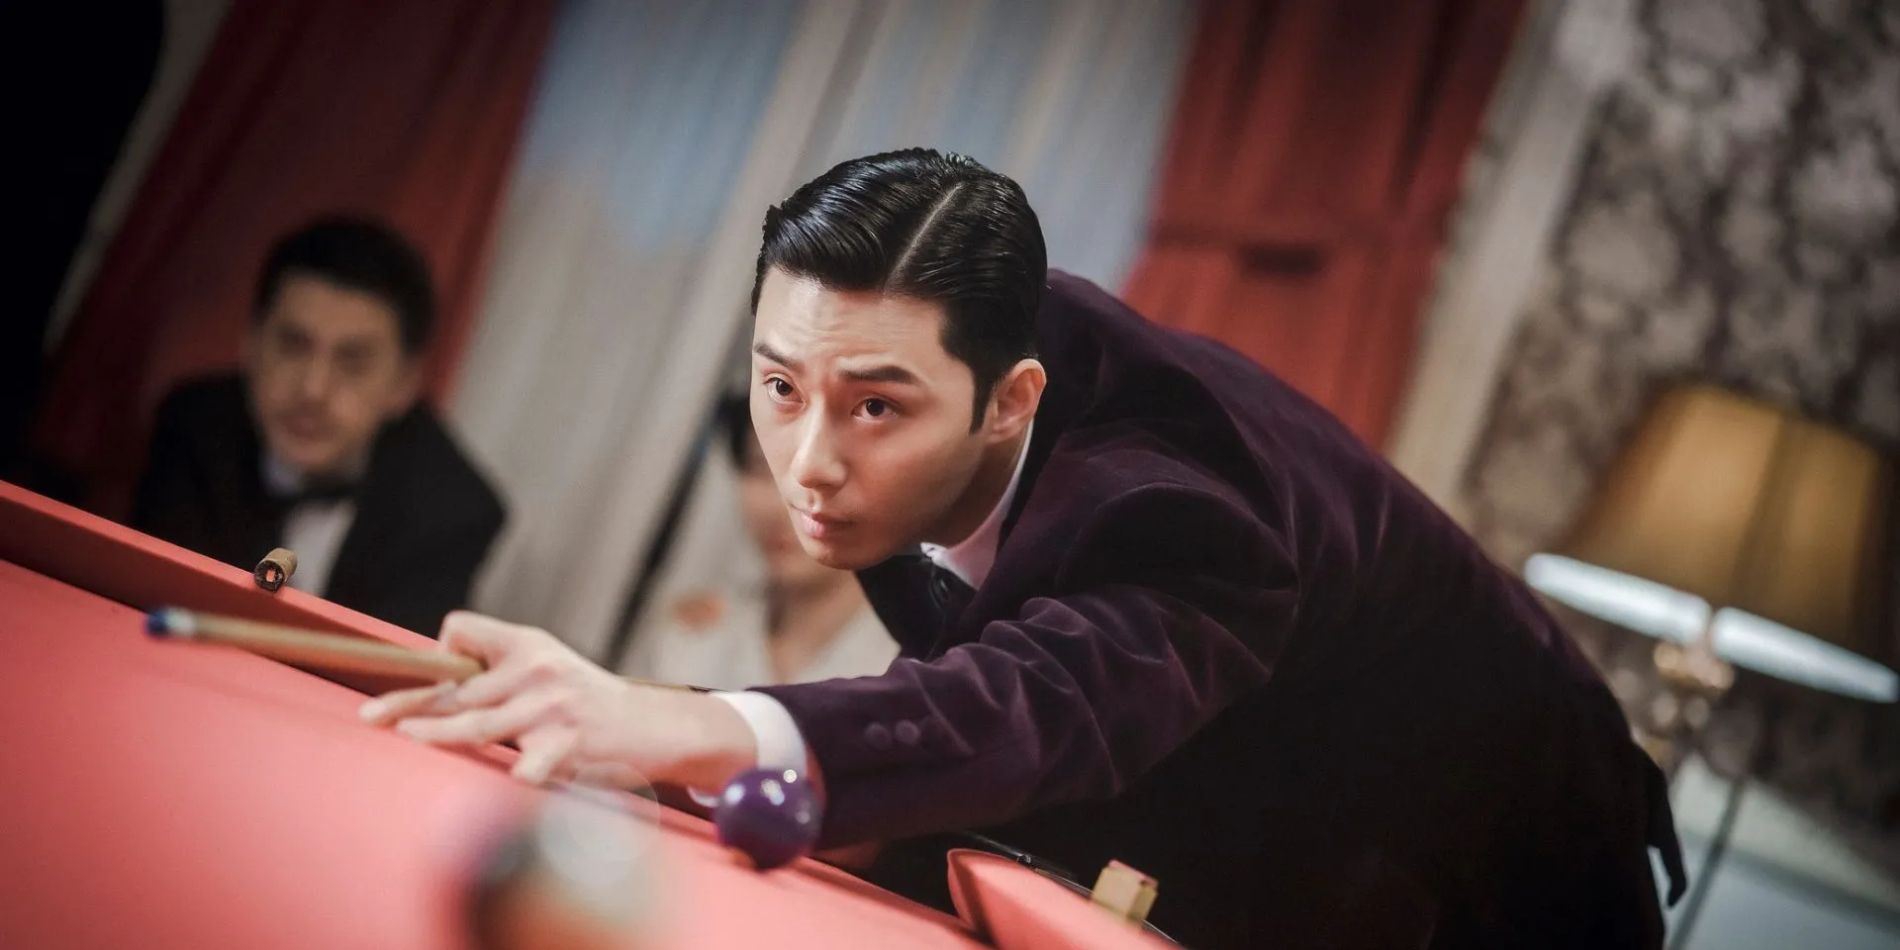 Park Seo-jun's Tae-sang leaning over a pool table and aiming the stick in Gyeongseong Creature